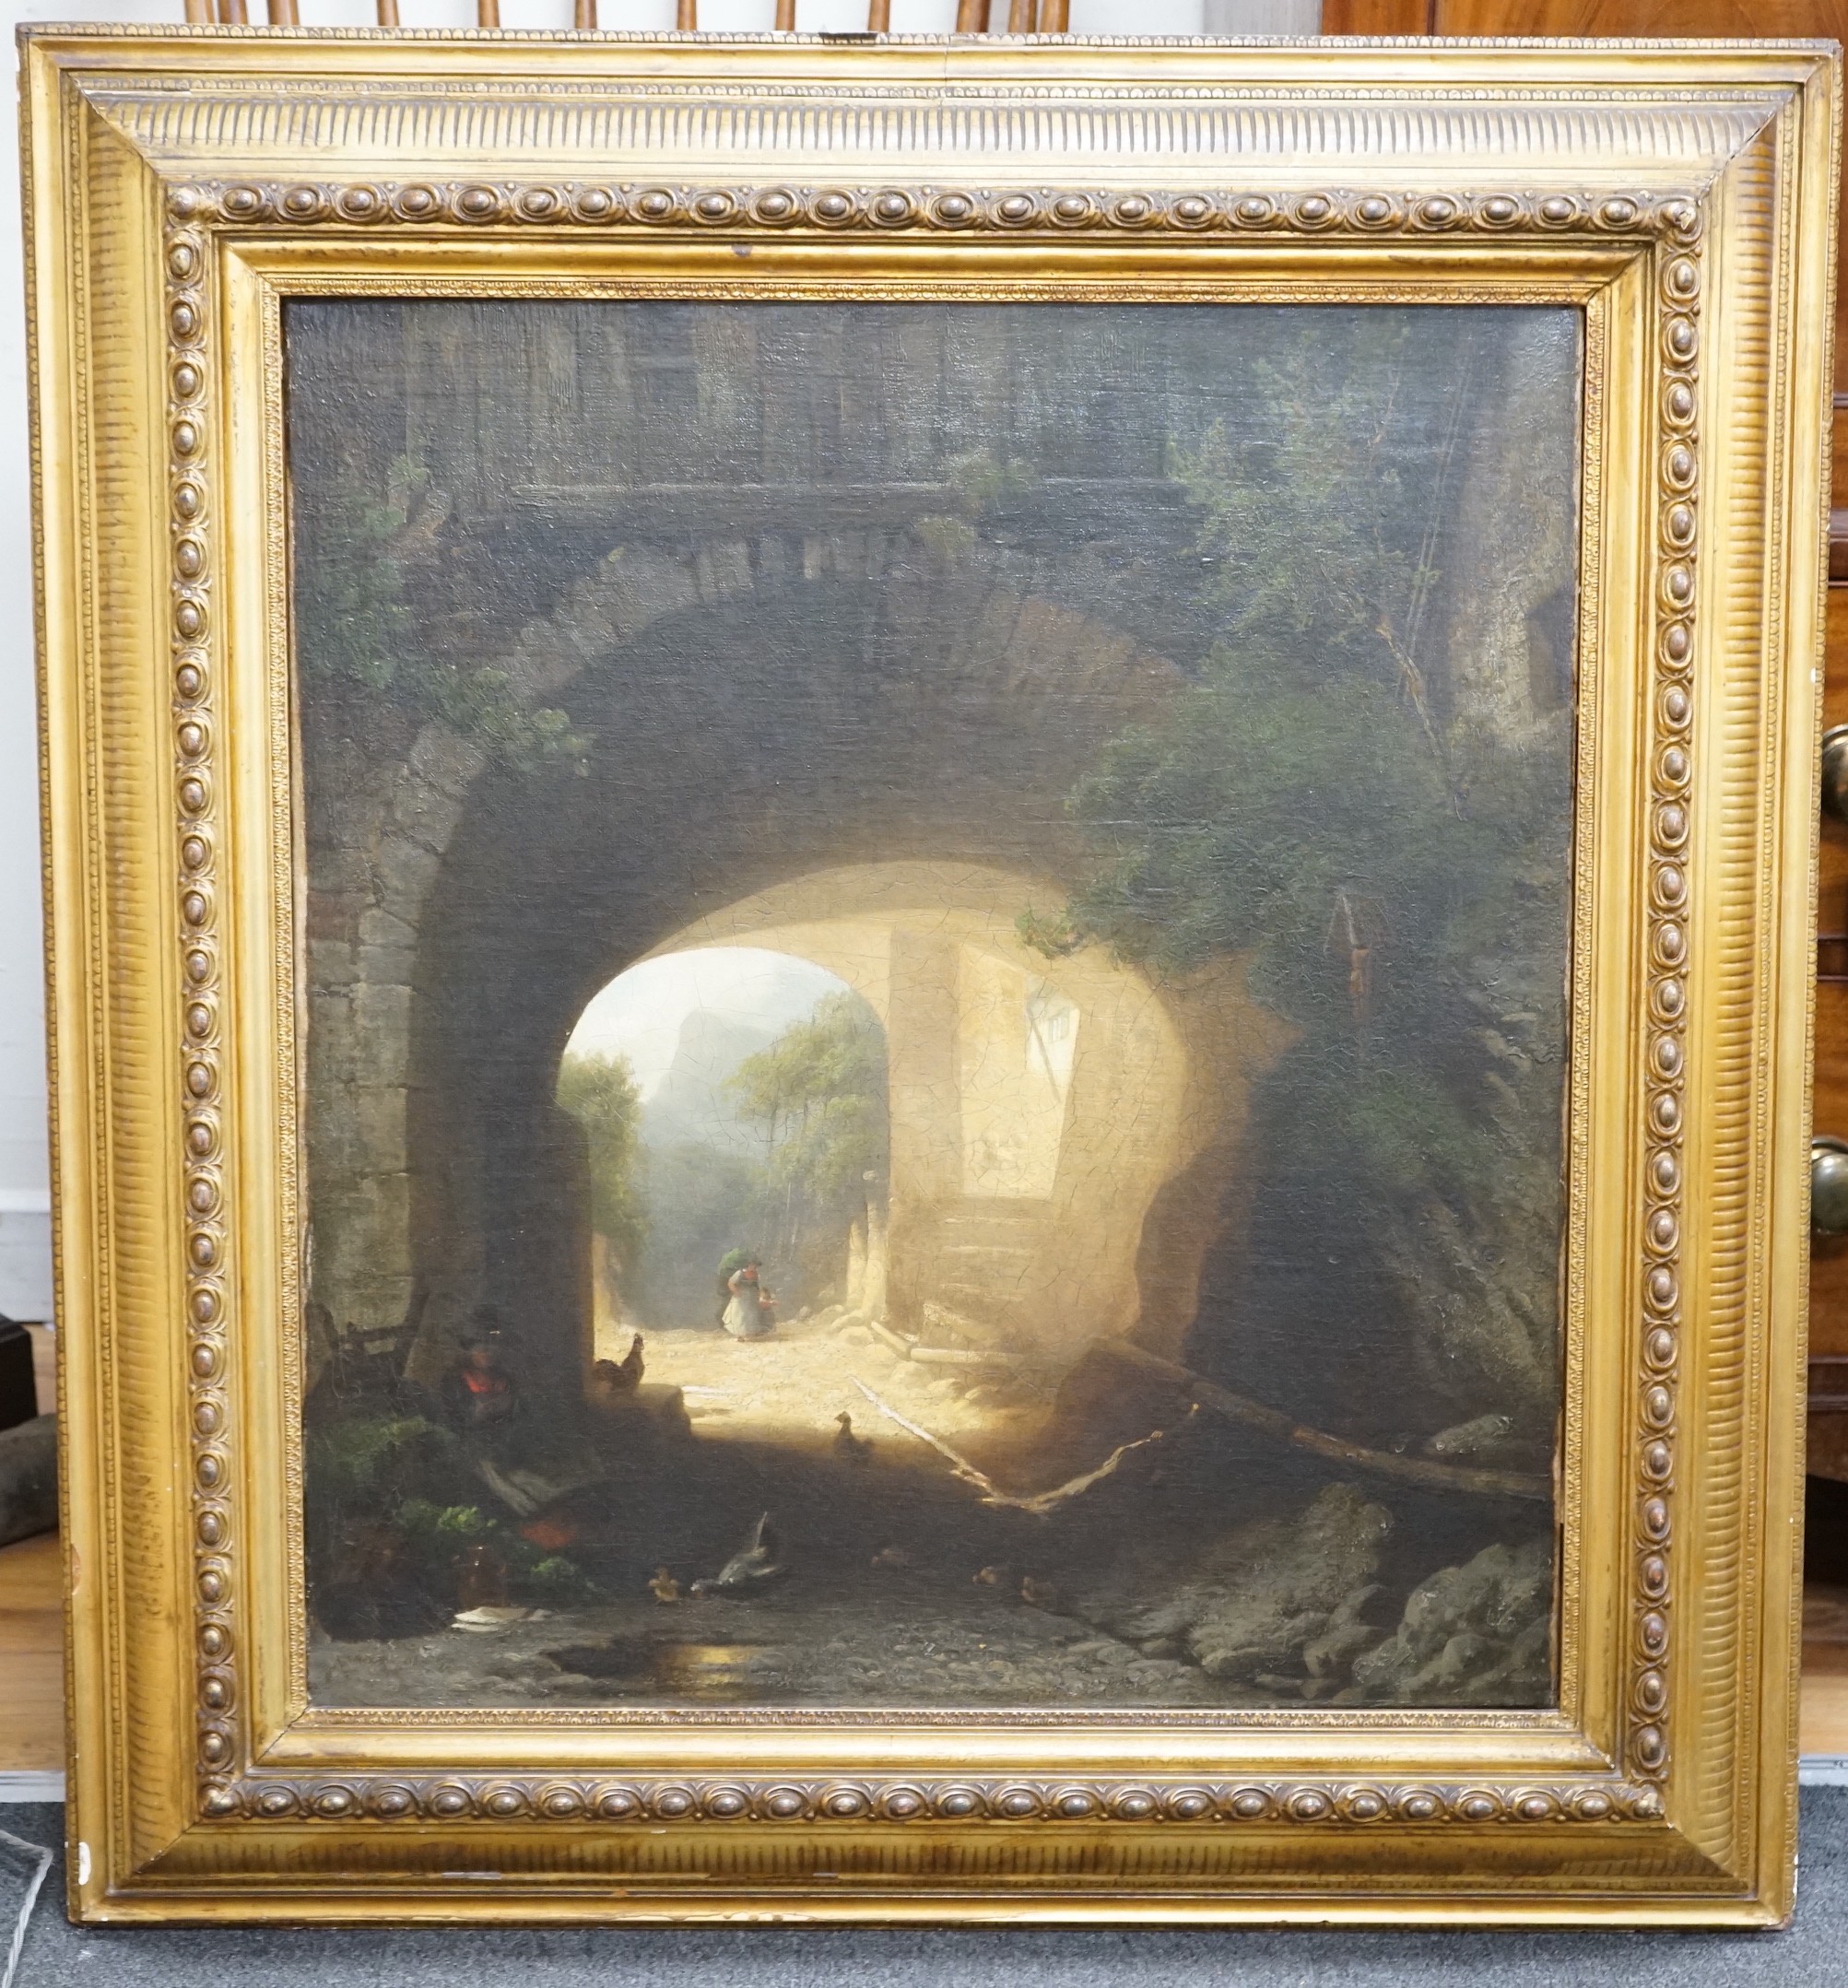 19th century French School, oil on canvas, Figures beneath an archway, 74 x 66cm